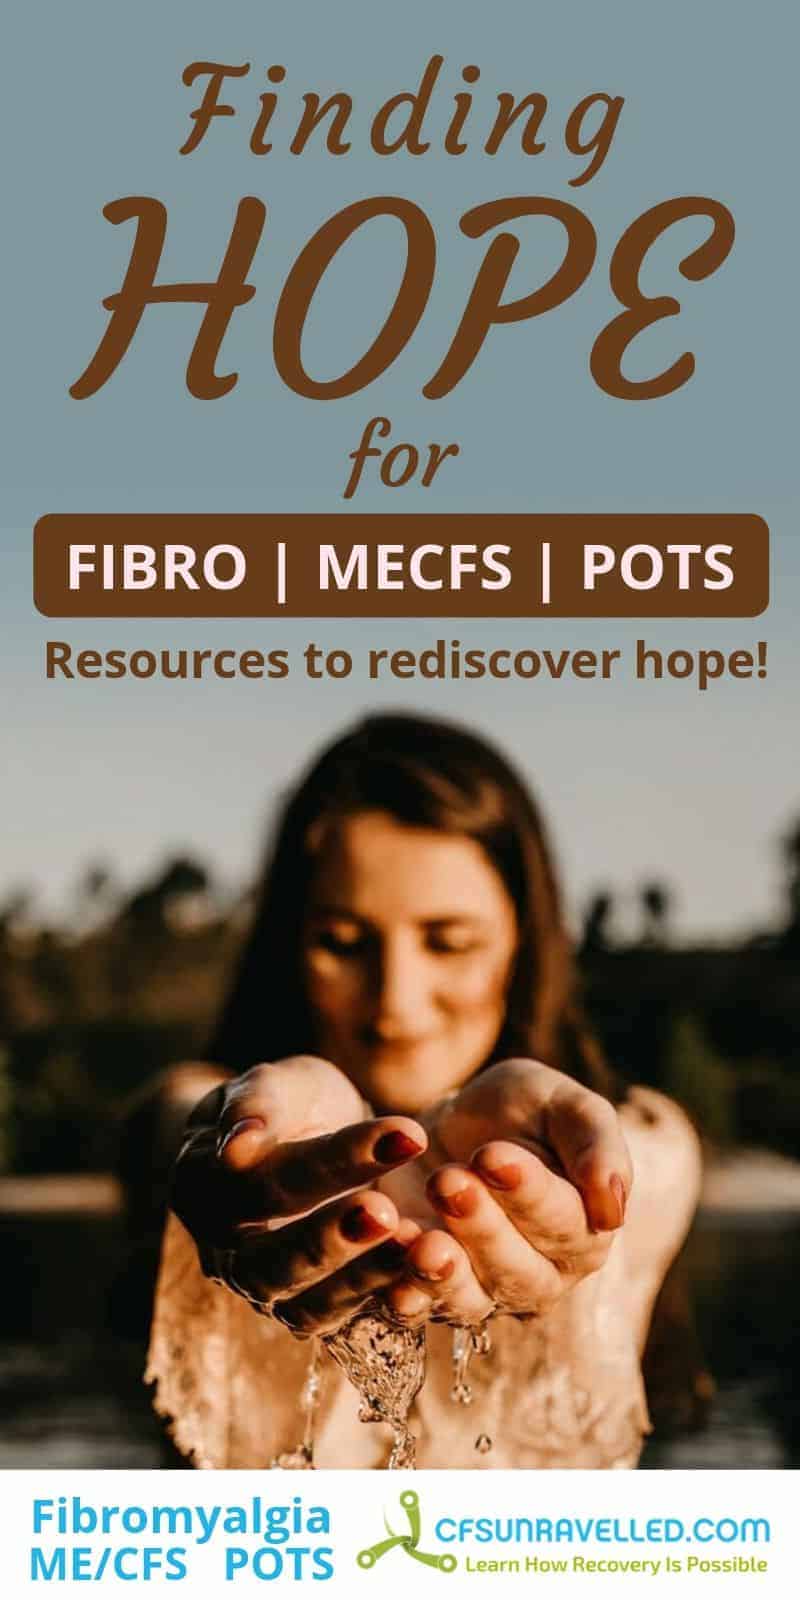 woman reaching forward with headline about hope for fibromyalgia mecfs pots